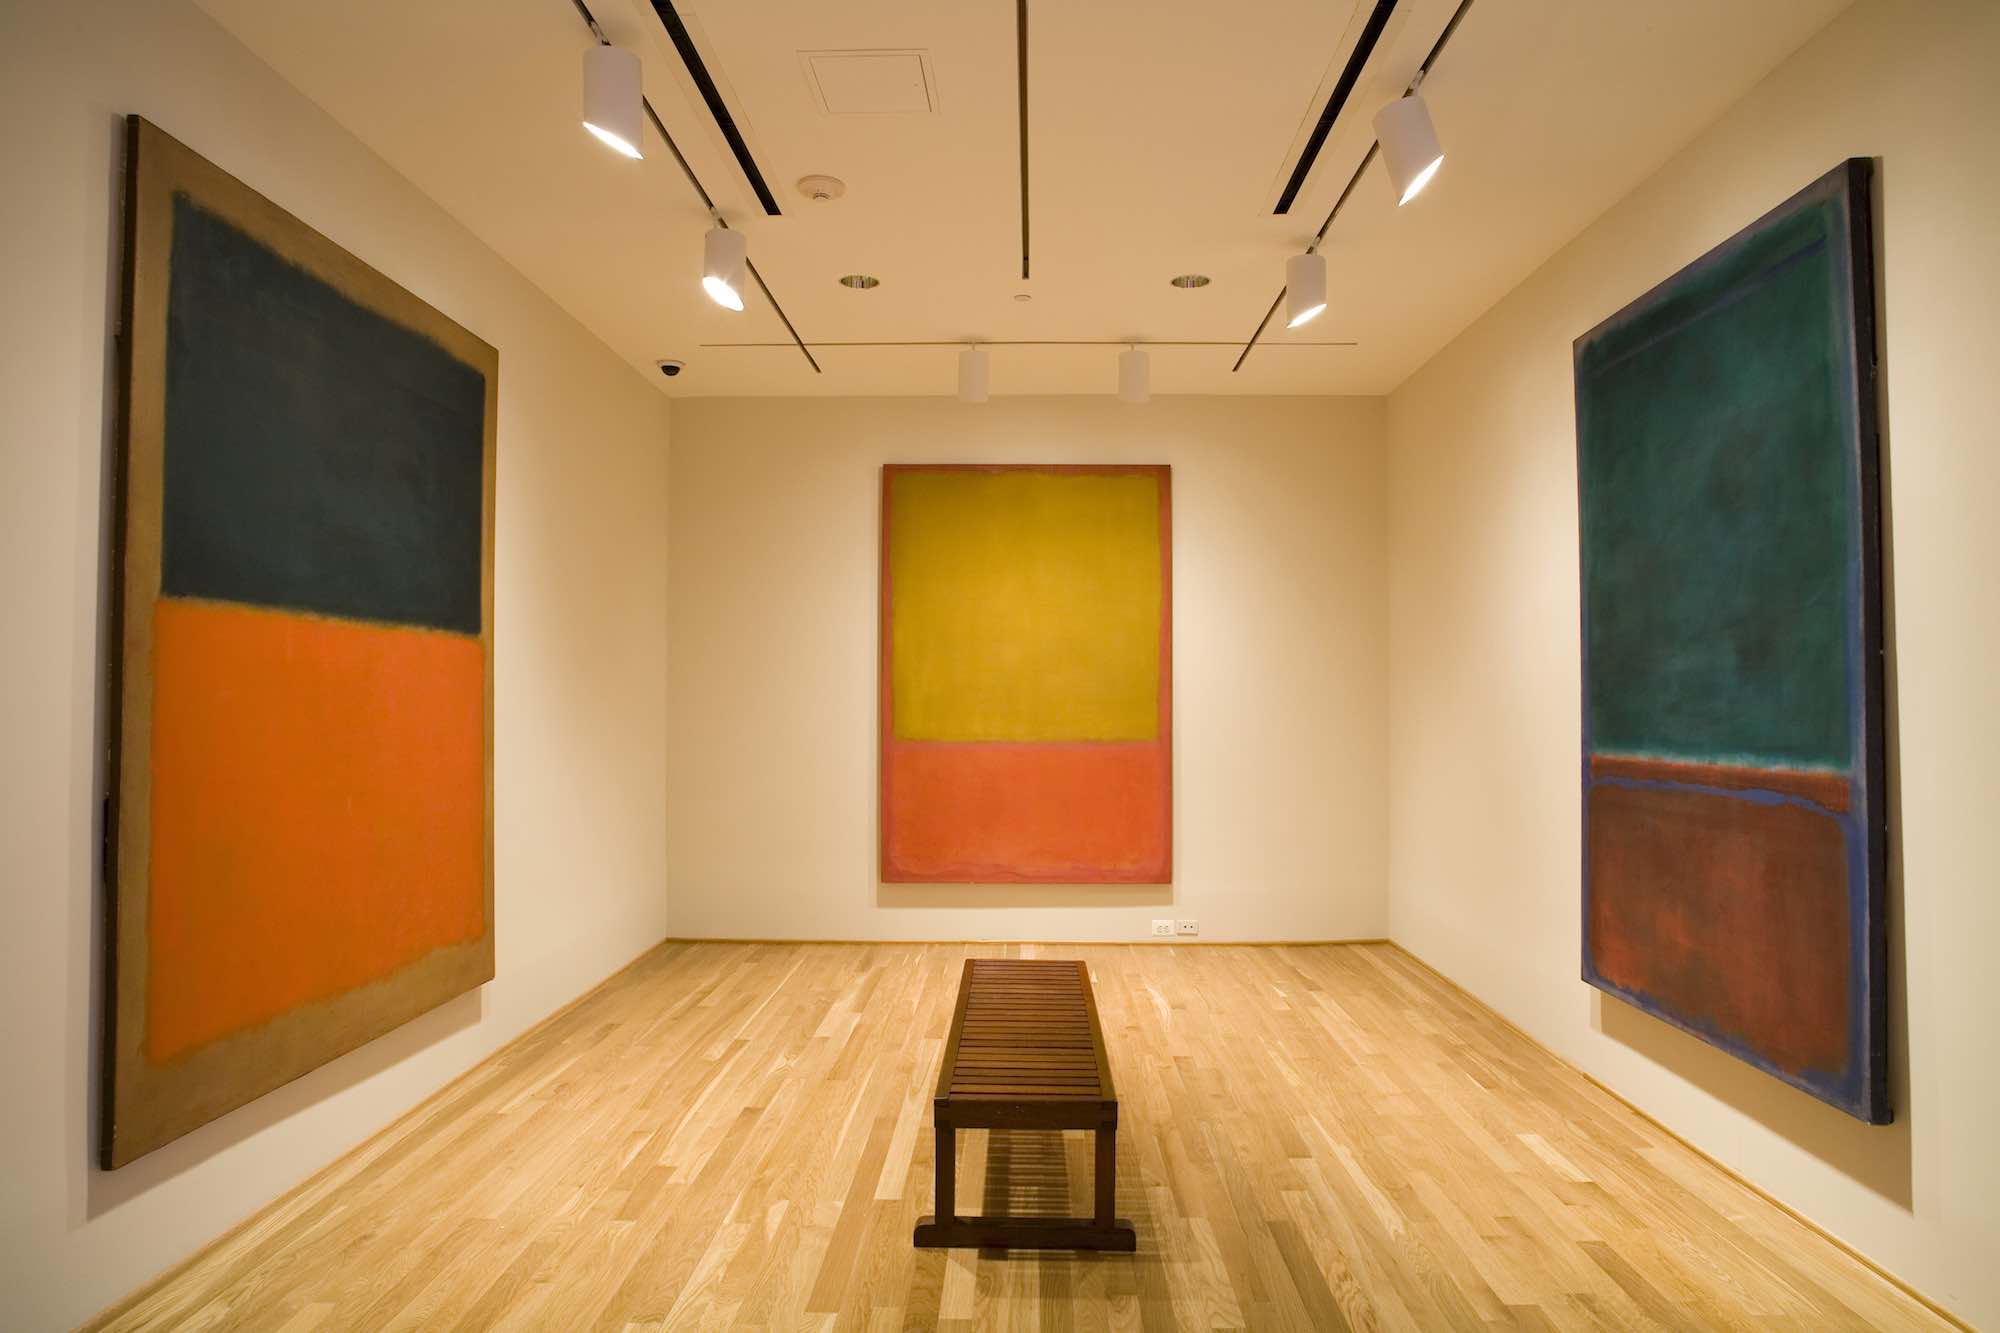 Photo by Robert Lautman. The Rothko Room at The Phillips Collection in Washington, DC.